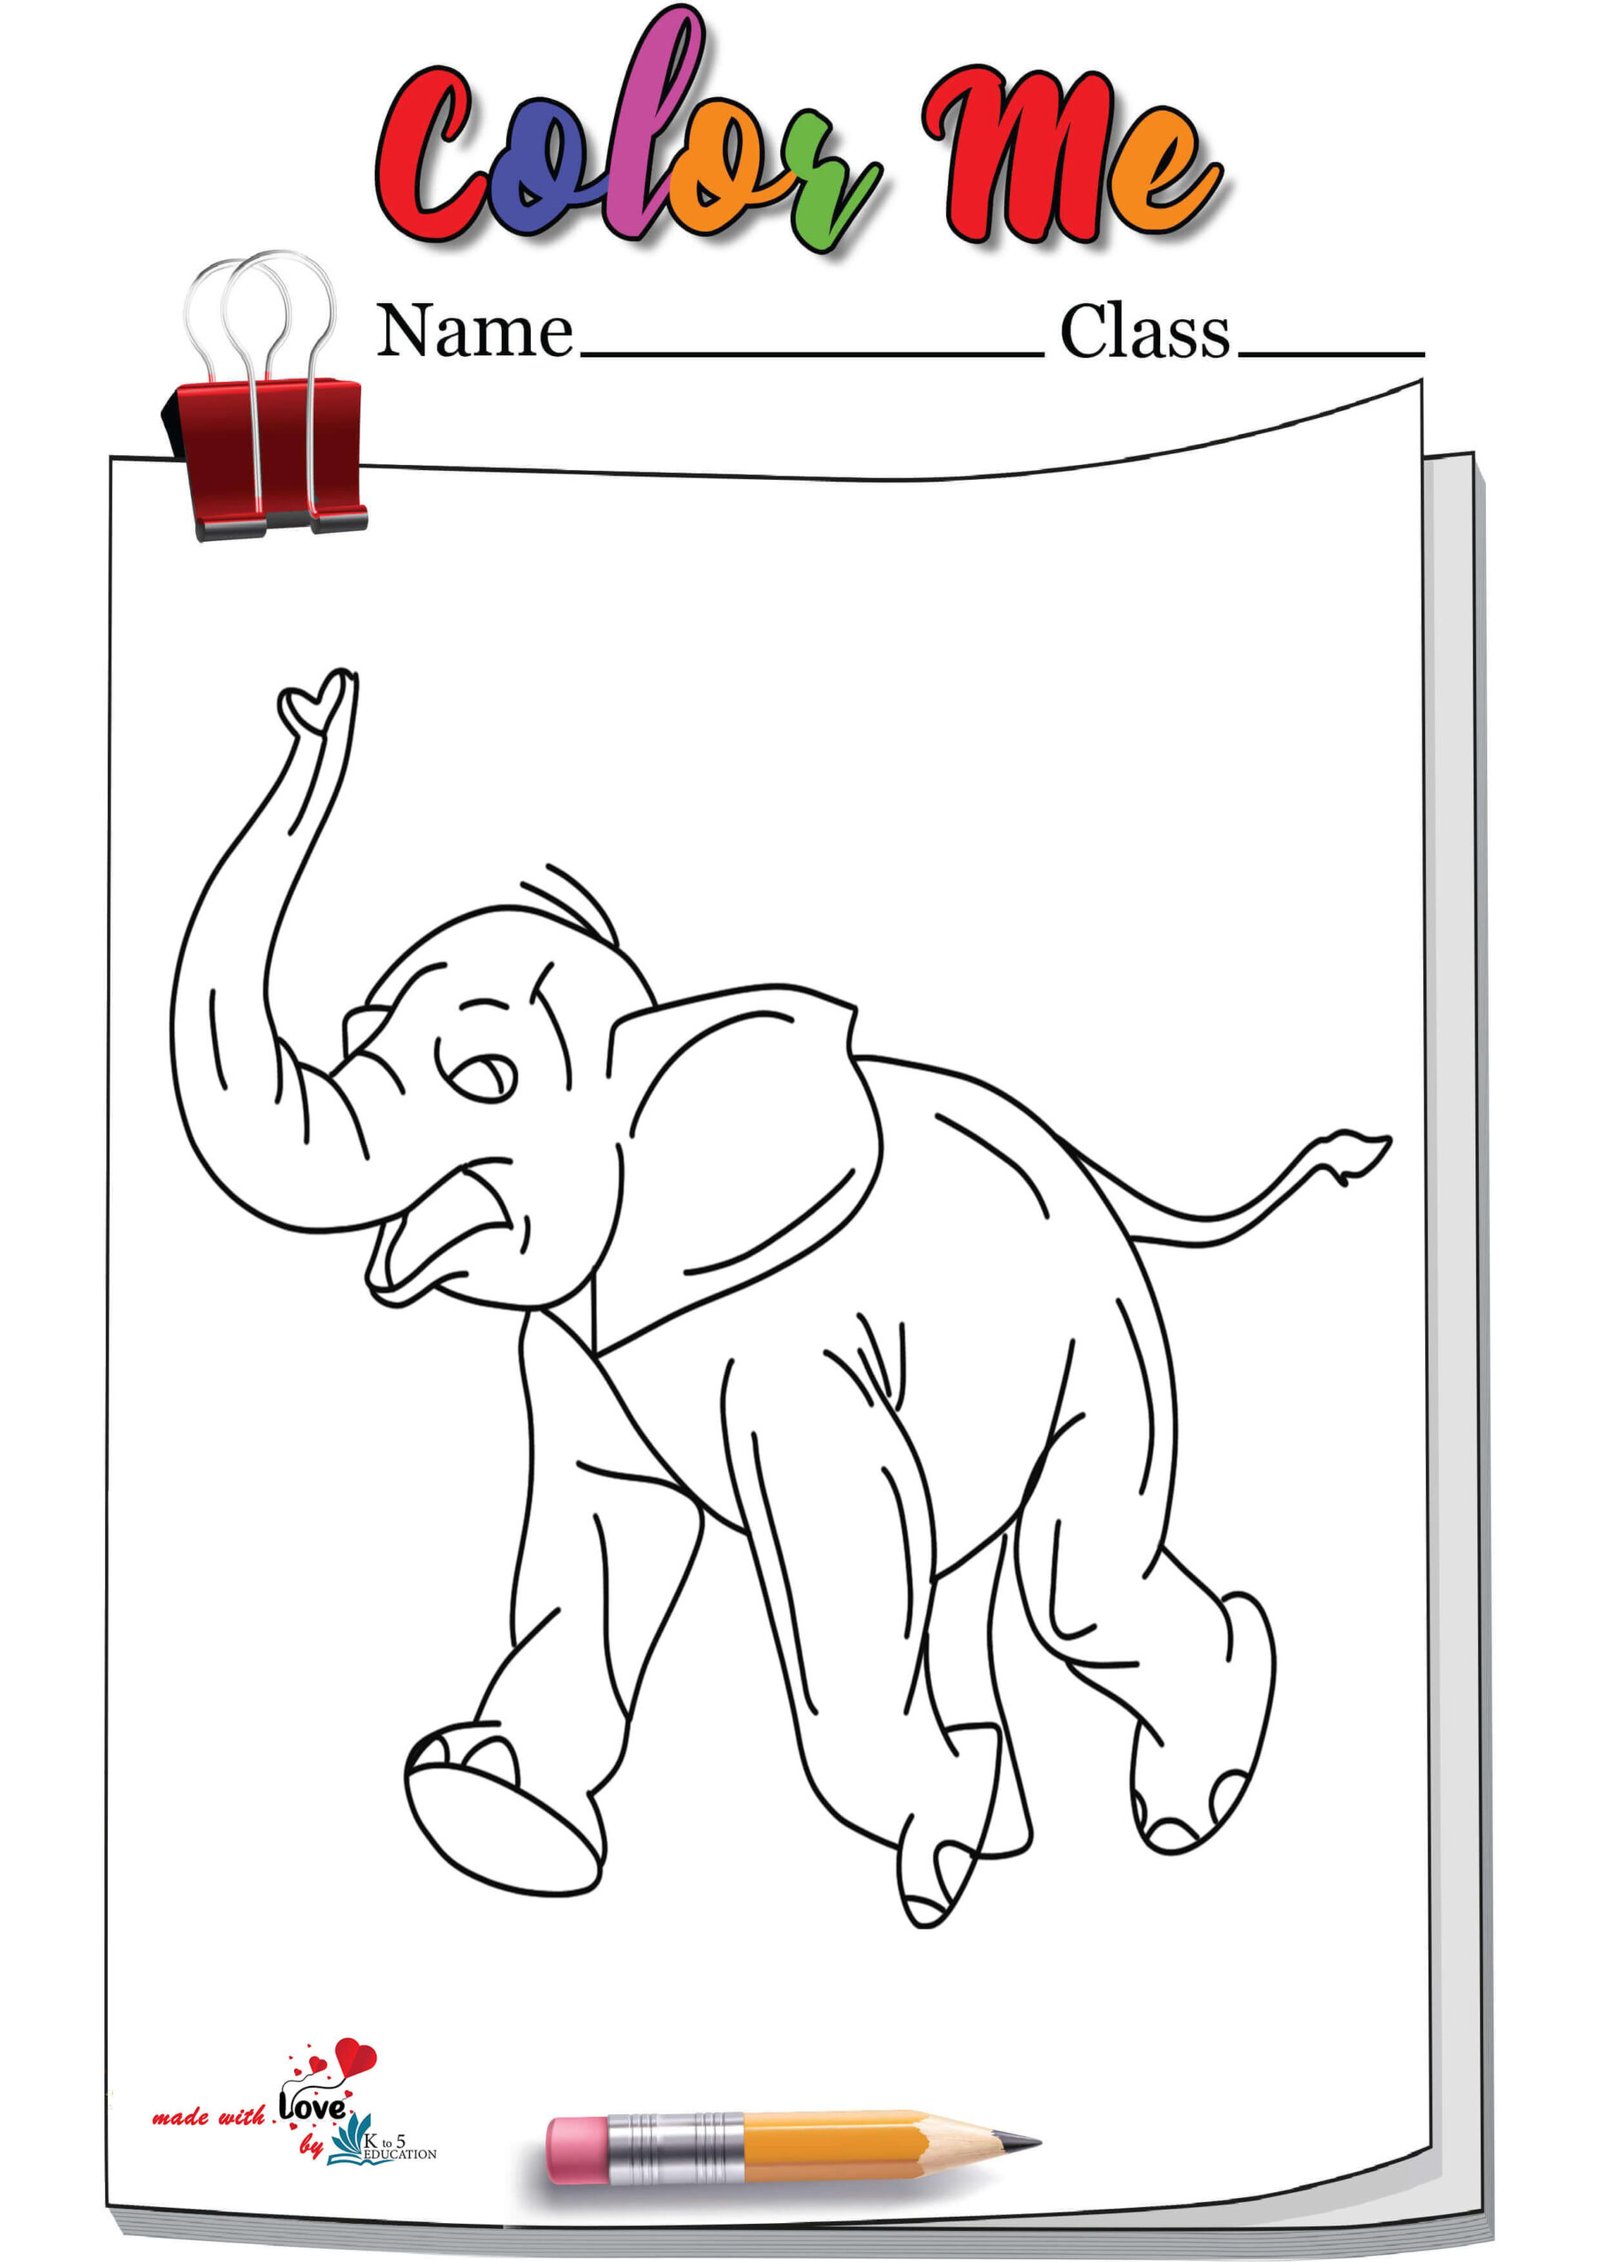 Running Elephant Coloring Pages